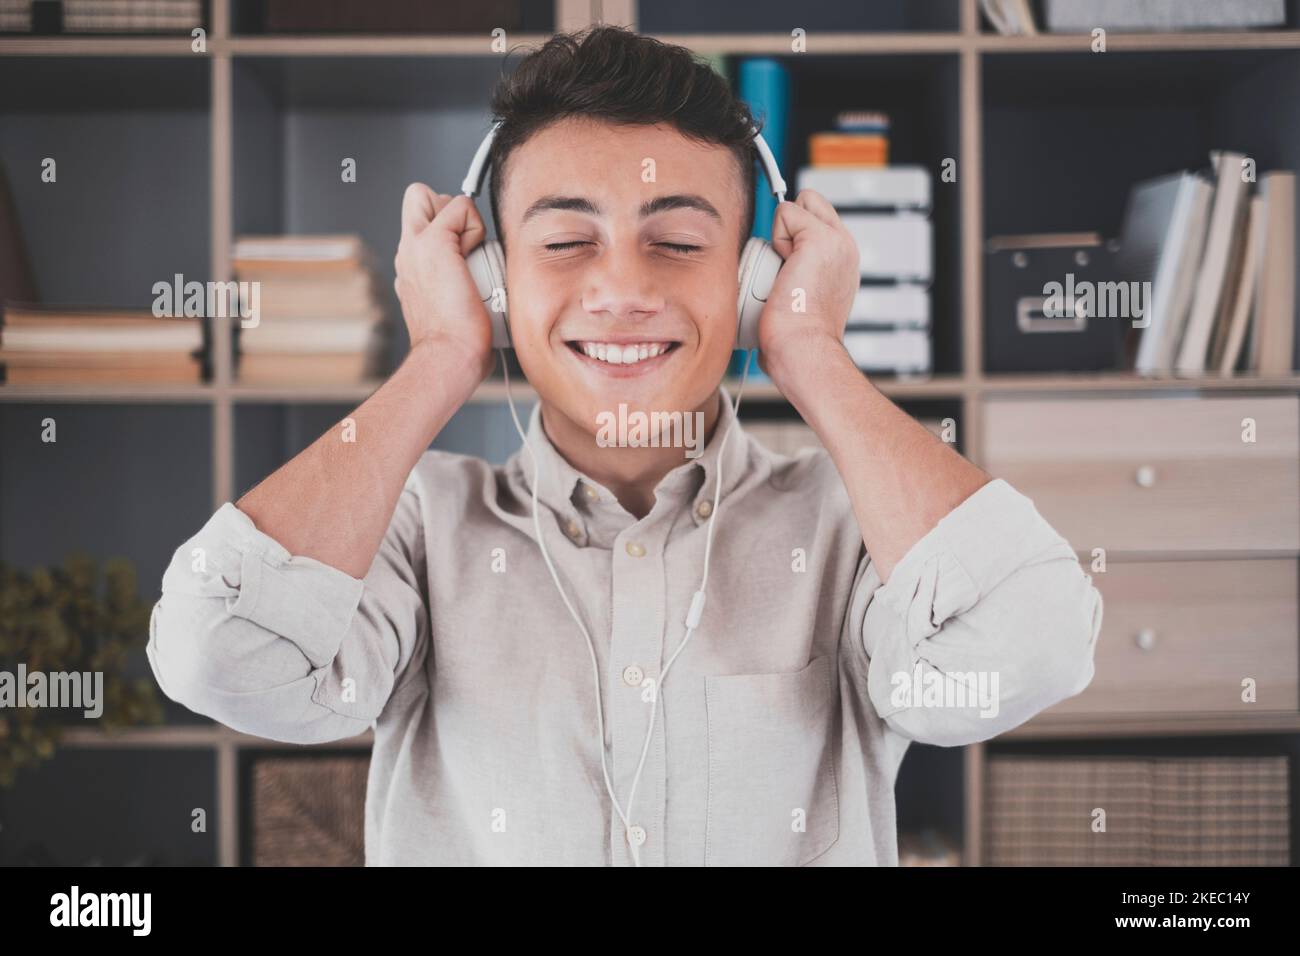 Tranquil carefree young teenager man at home, wearing modern wireless headphones, listening to favorite classic music online, feeling peaceful mindful alone in living room. Stock Photo